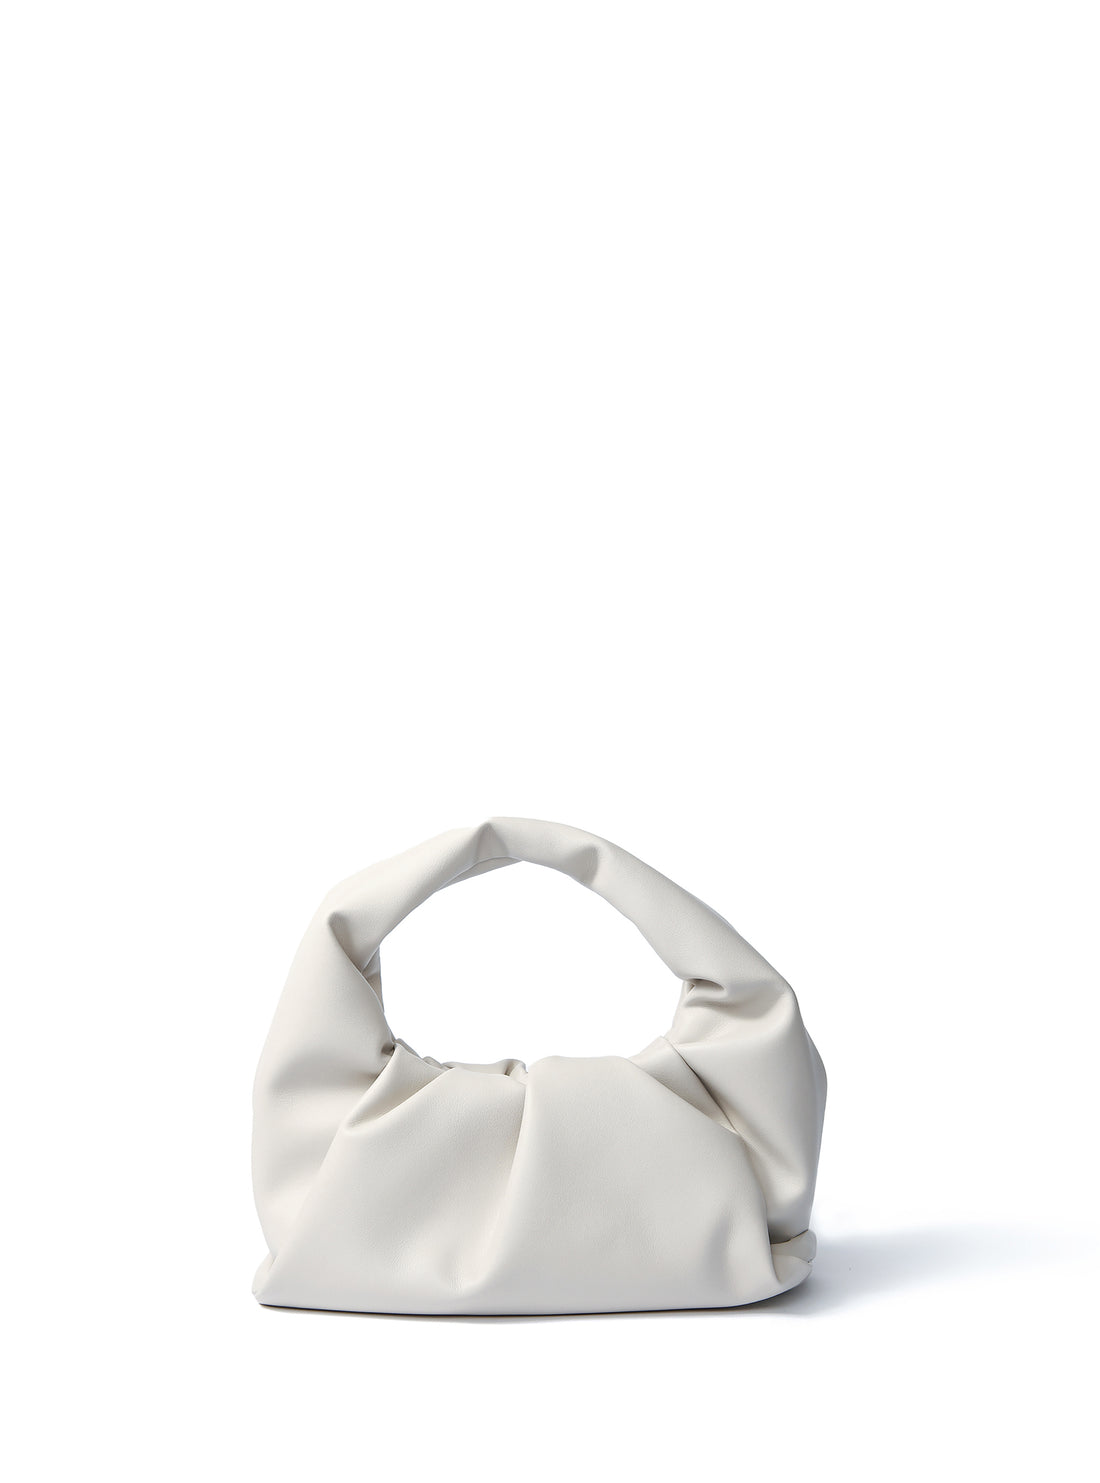 Marshmallow Croissant Bag in Soft Leather from Beverly Hills – Bob Oré